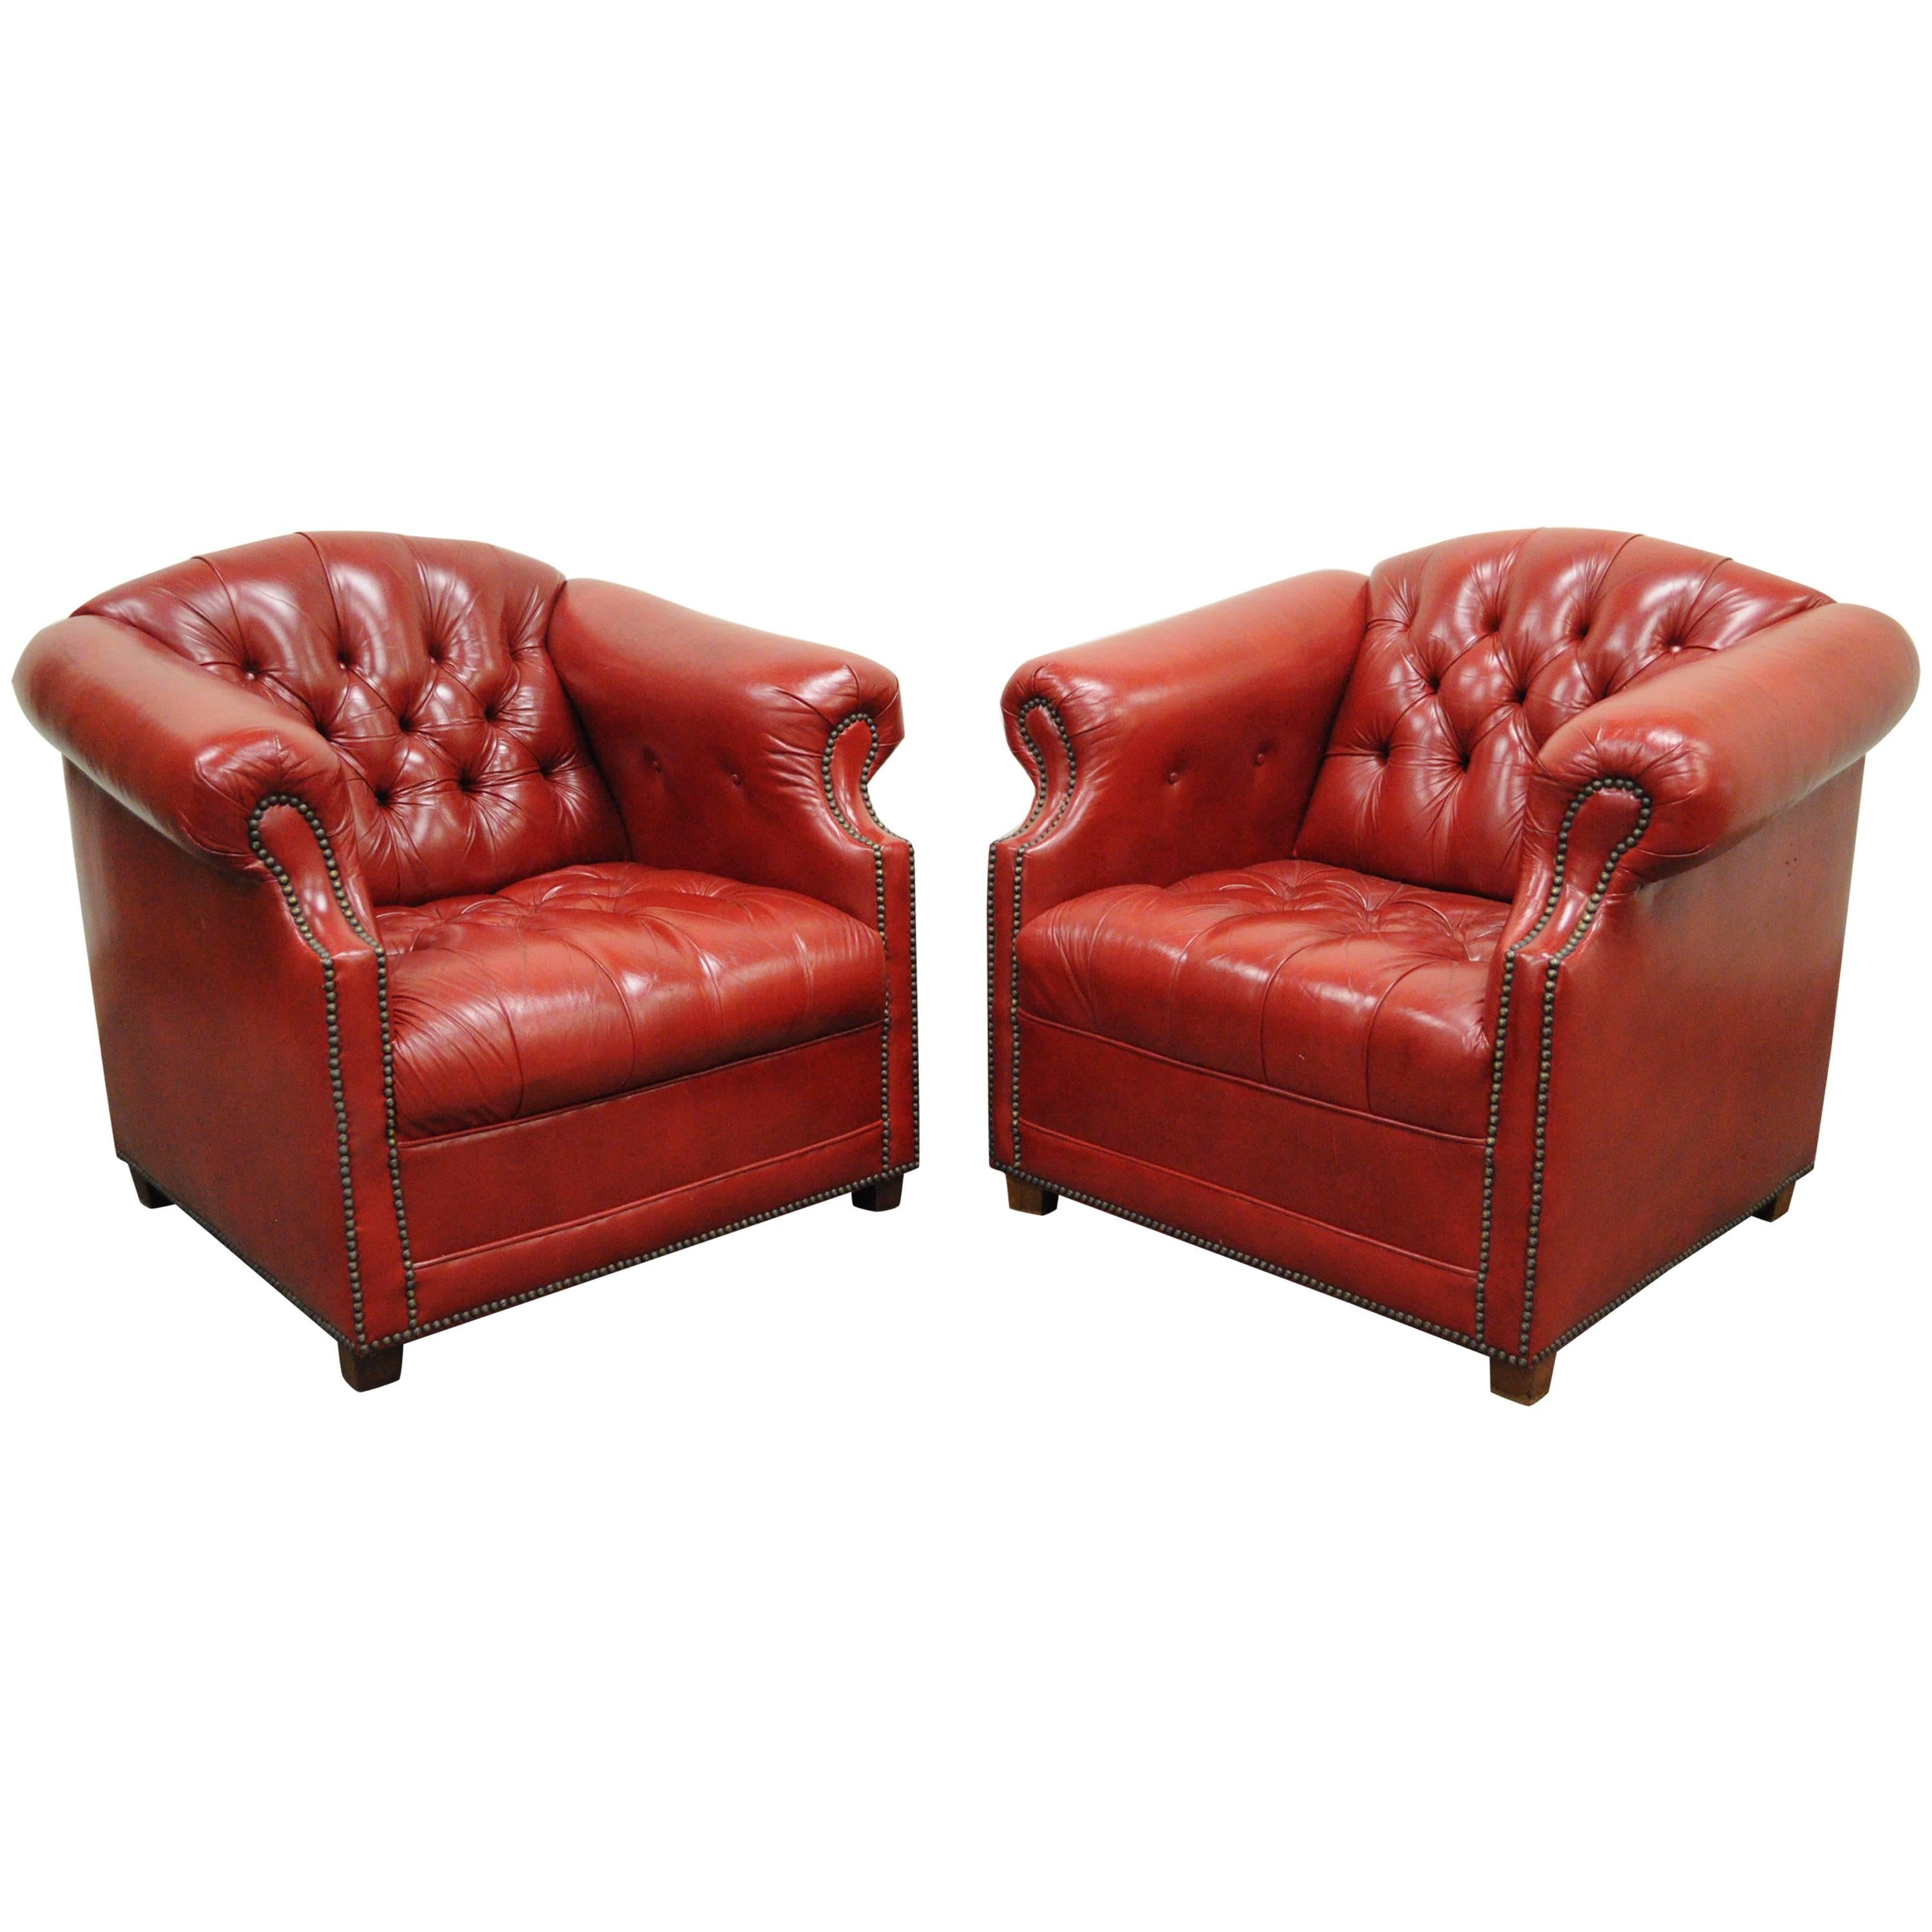 Pair of Red Leather English Chesterfield Style Button Tufted Club Lounge Chairs